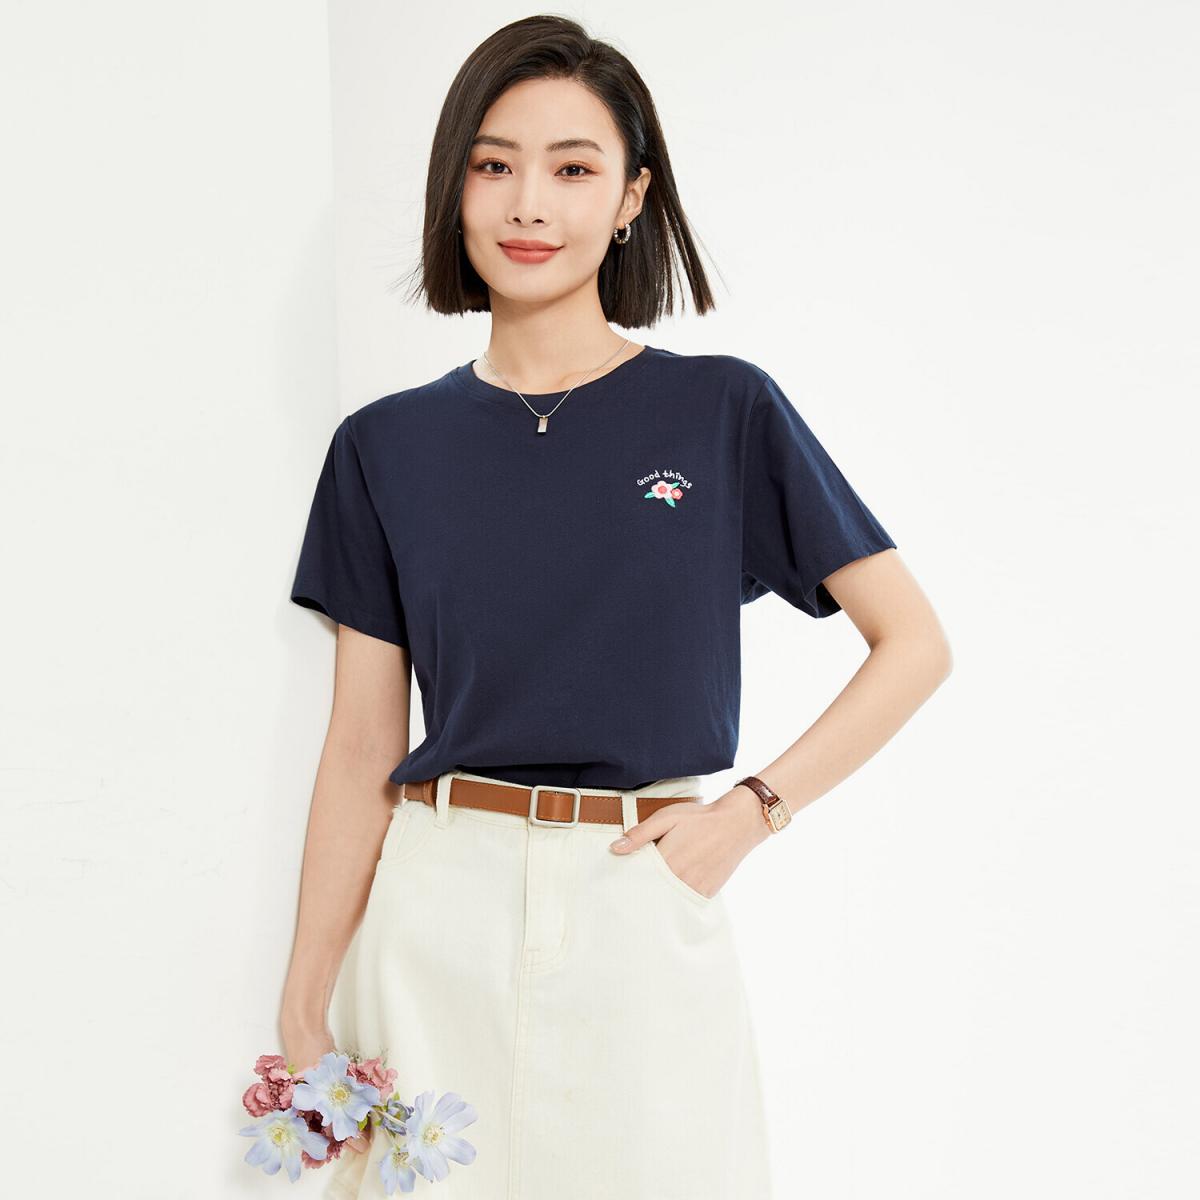 【Online Exclusive】BM Women's Cotton Embroidery Round Neck Short-sleeved T-shirt (Size S)